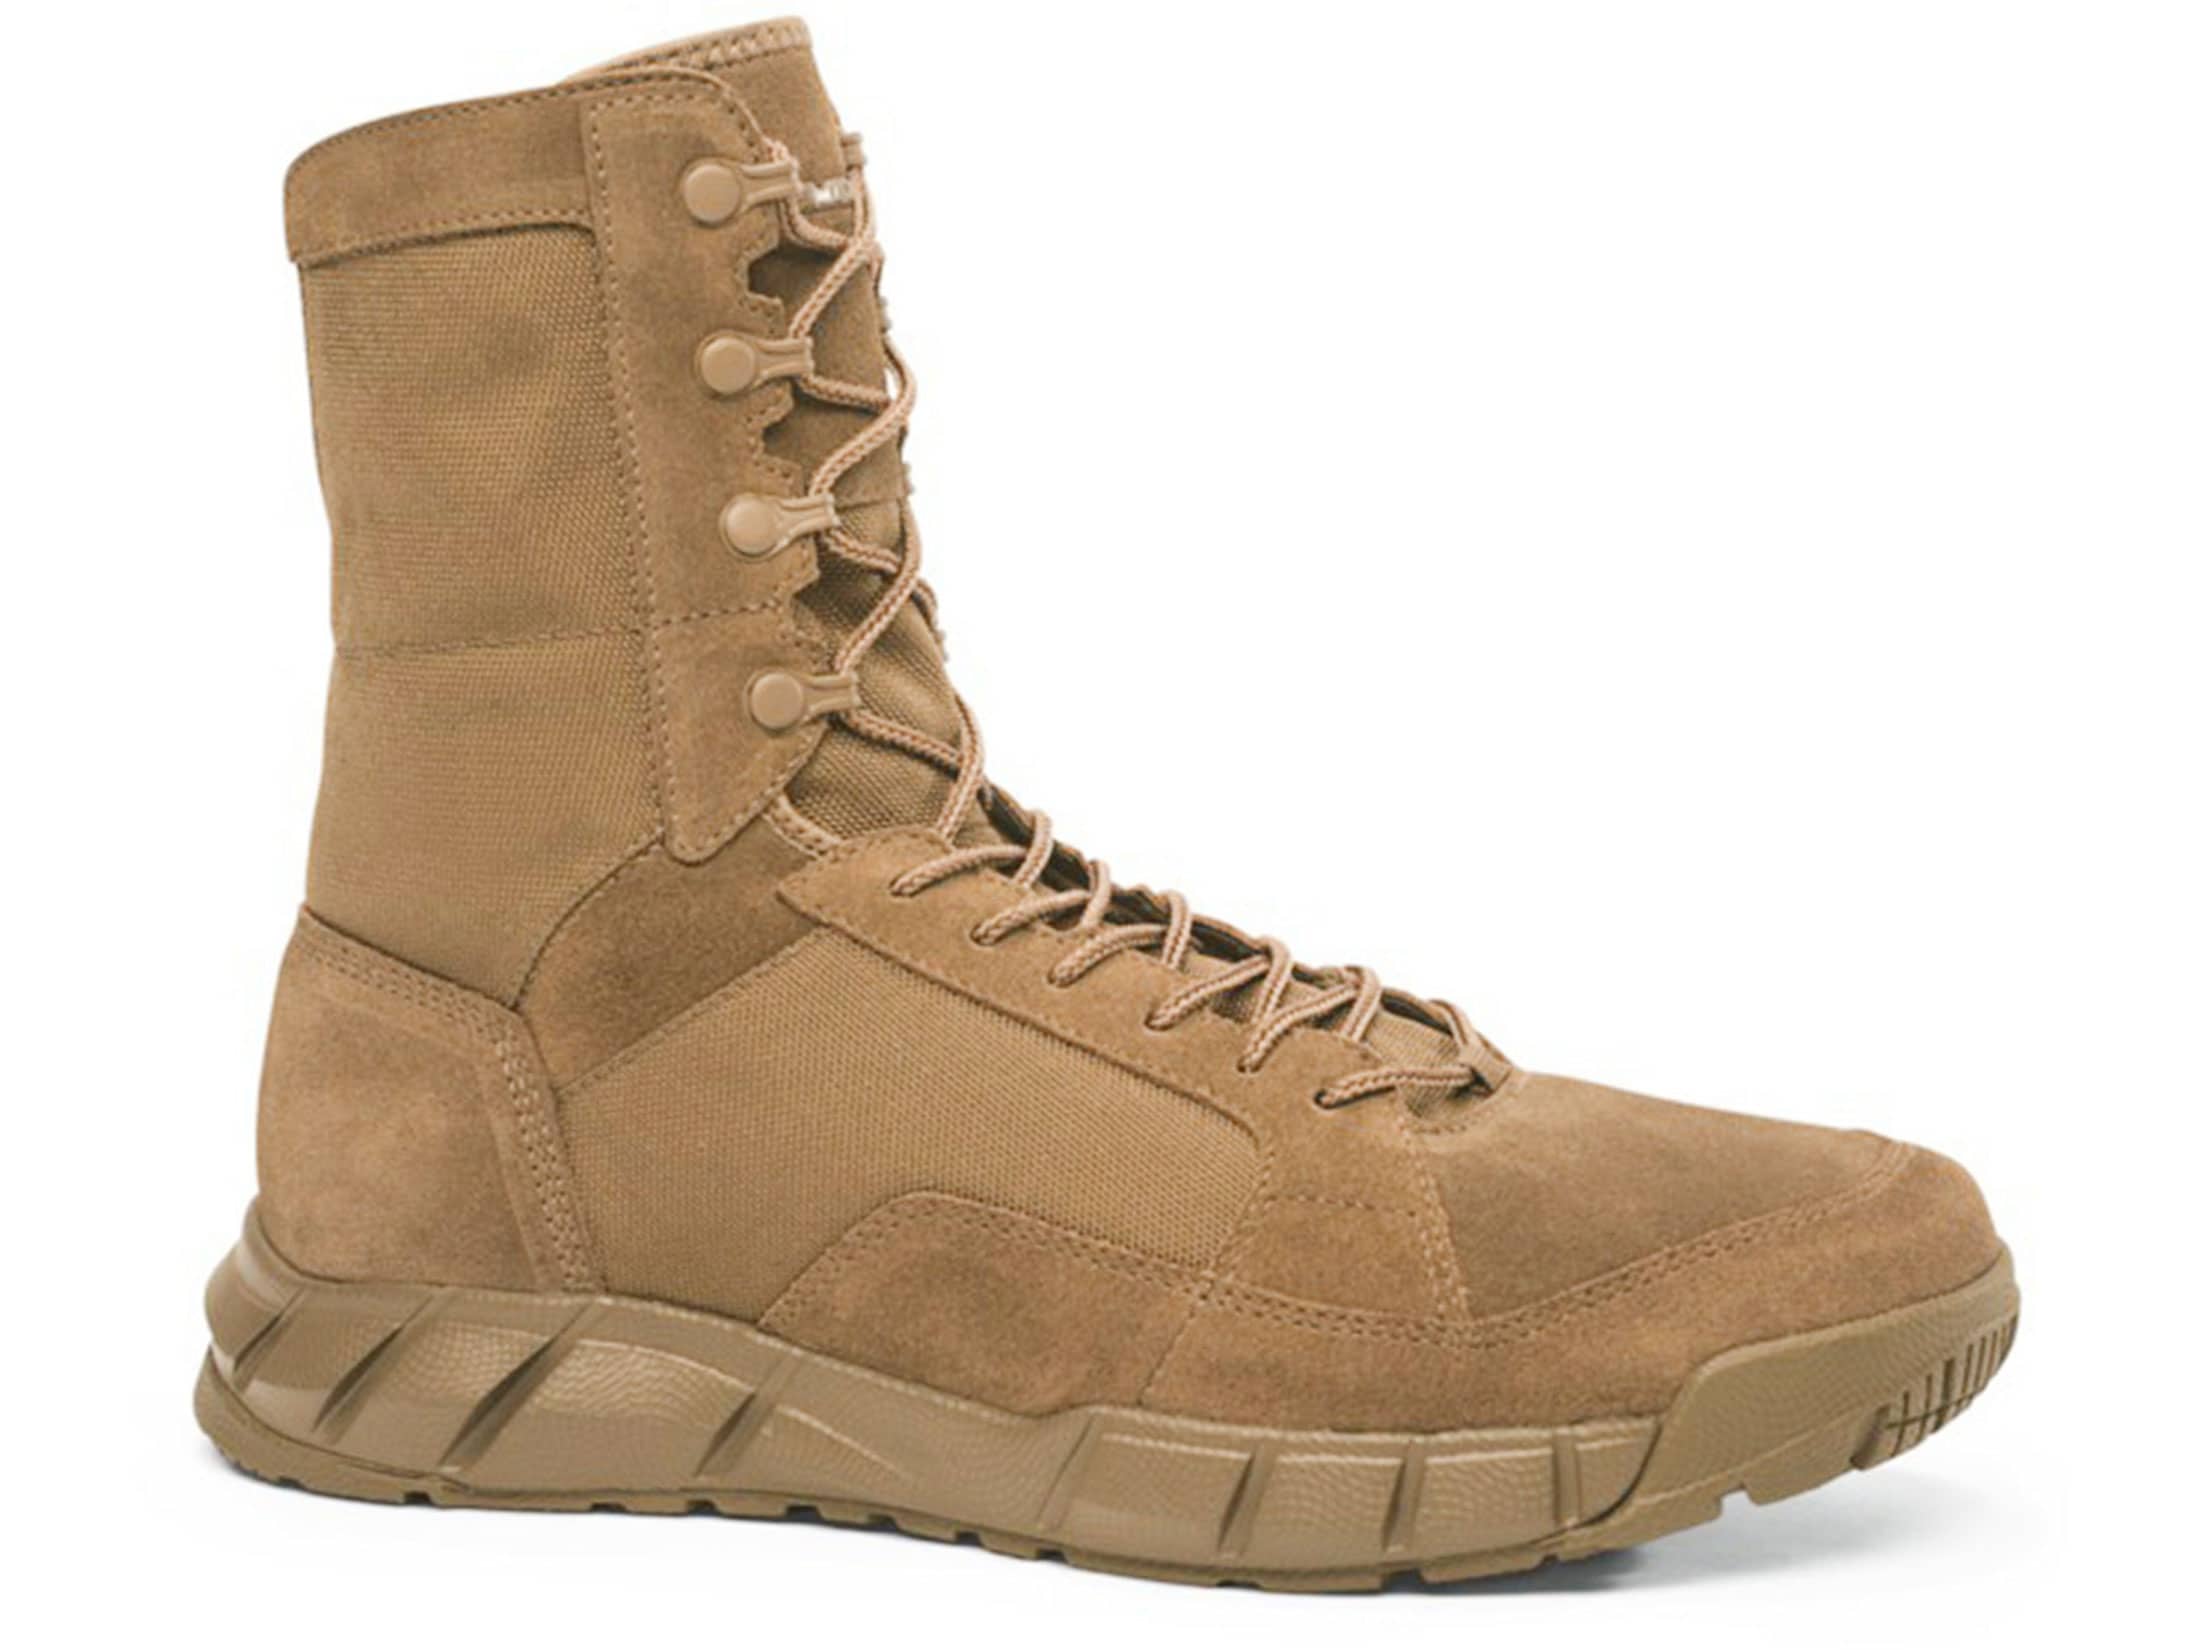 Oakley Light 8 Tactical Boots Leather Synthetic Coyote Men's 9.5 D